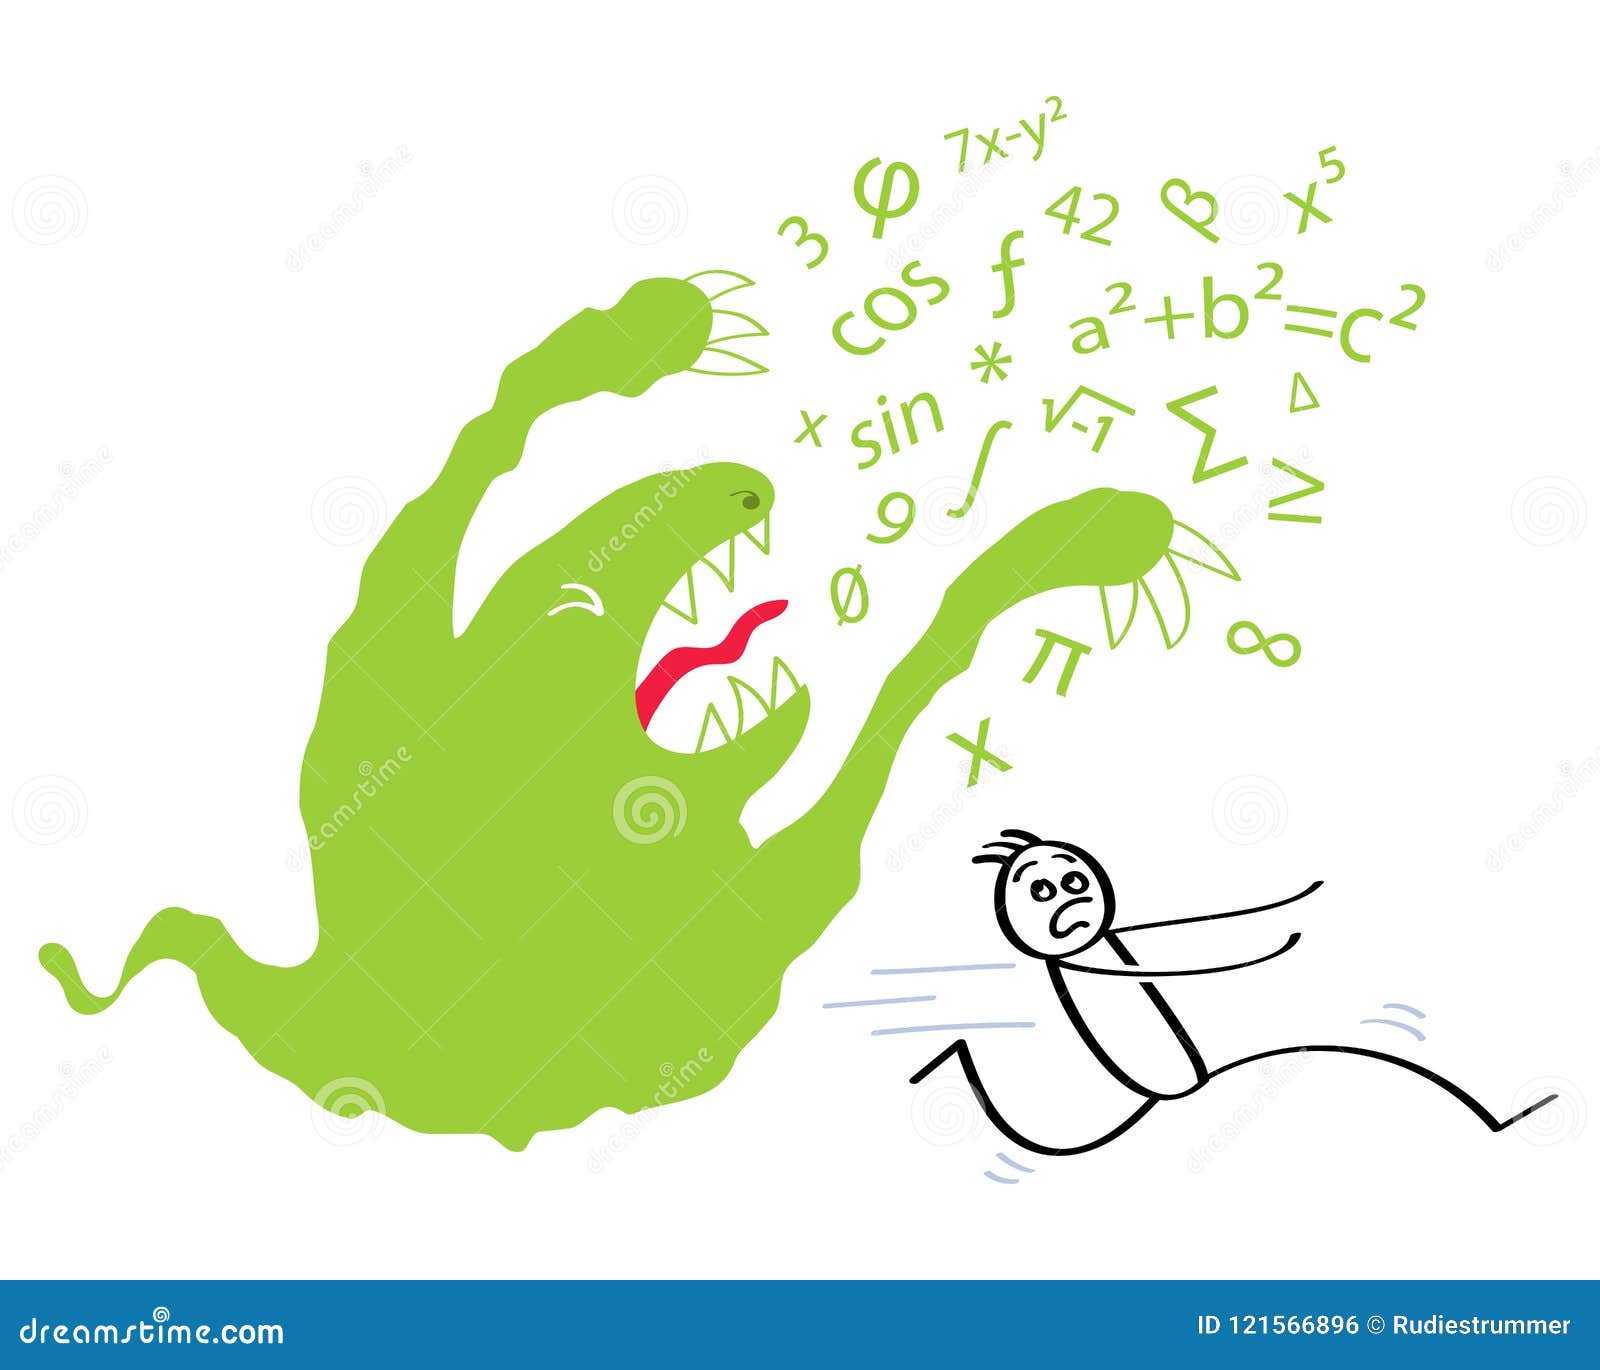 Math Phobia, Math Anxiety, Funny Green Cartoon Monster Spewing Numbers  Chasing Student Stock Vector - Illustration of demon, maths: 121566896